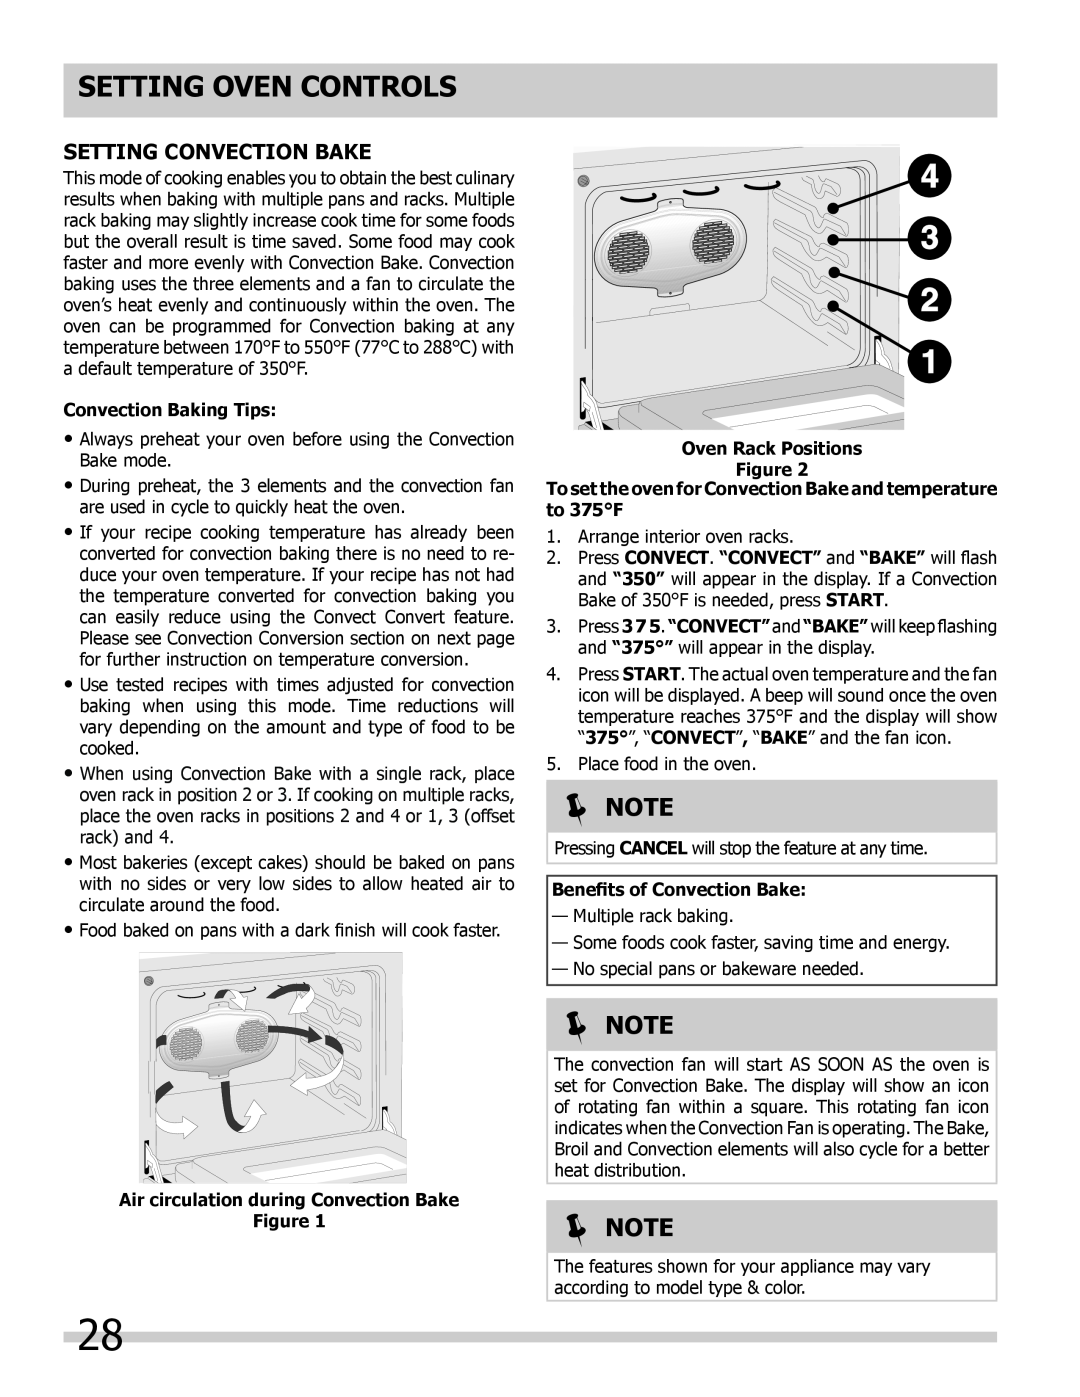 Frigidaire 318205300 Setting Oven Controls, Setting Convection Bake,  Note, Convection Baking Tips, Oven Rack Positions 